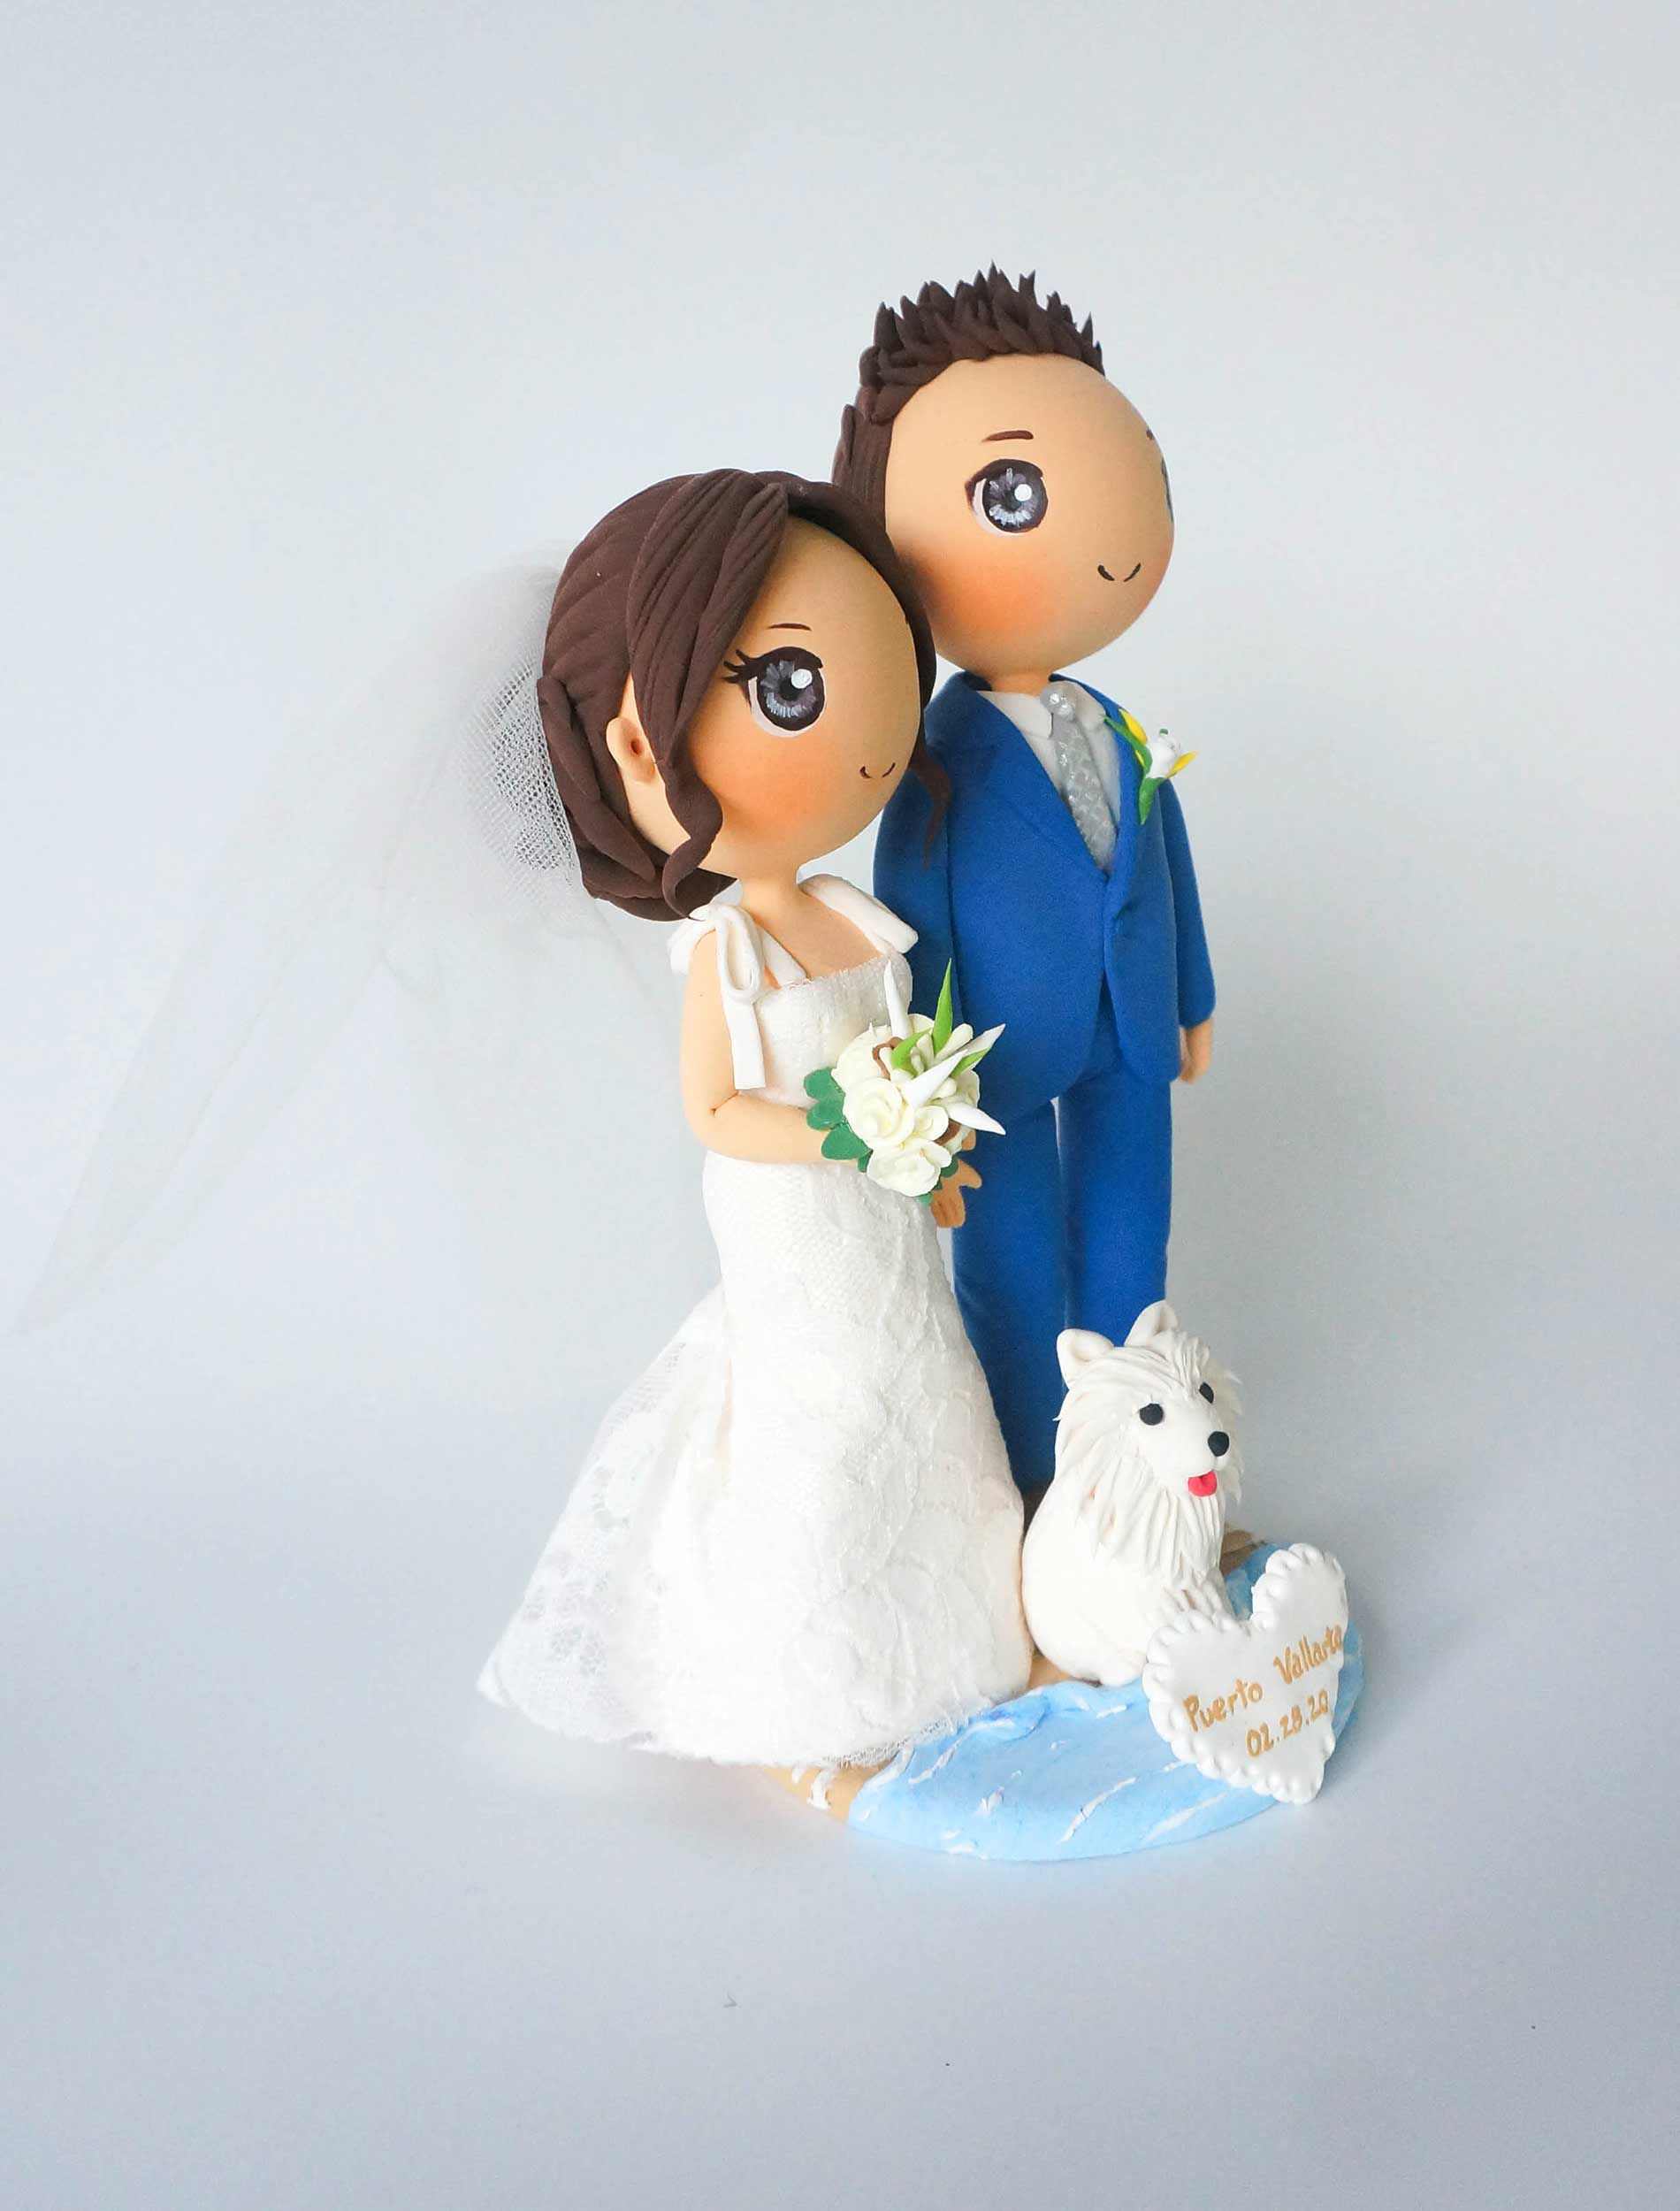 Romantic Beach Bride and Groom Wedding Cake Topper Personalized 